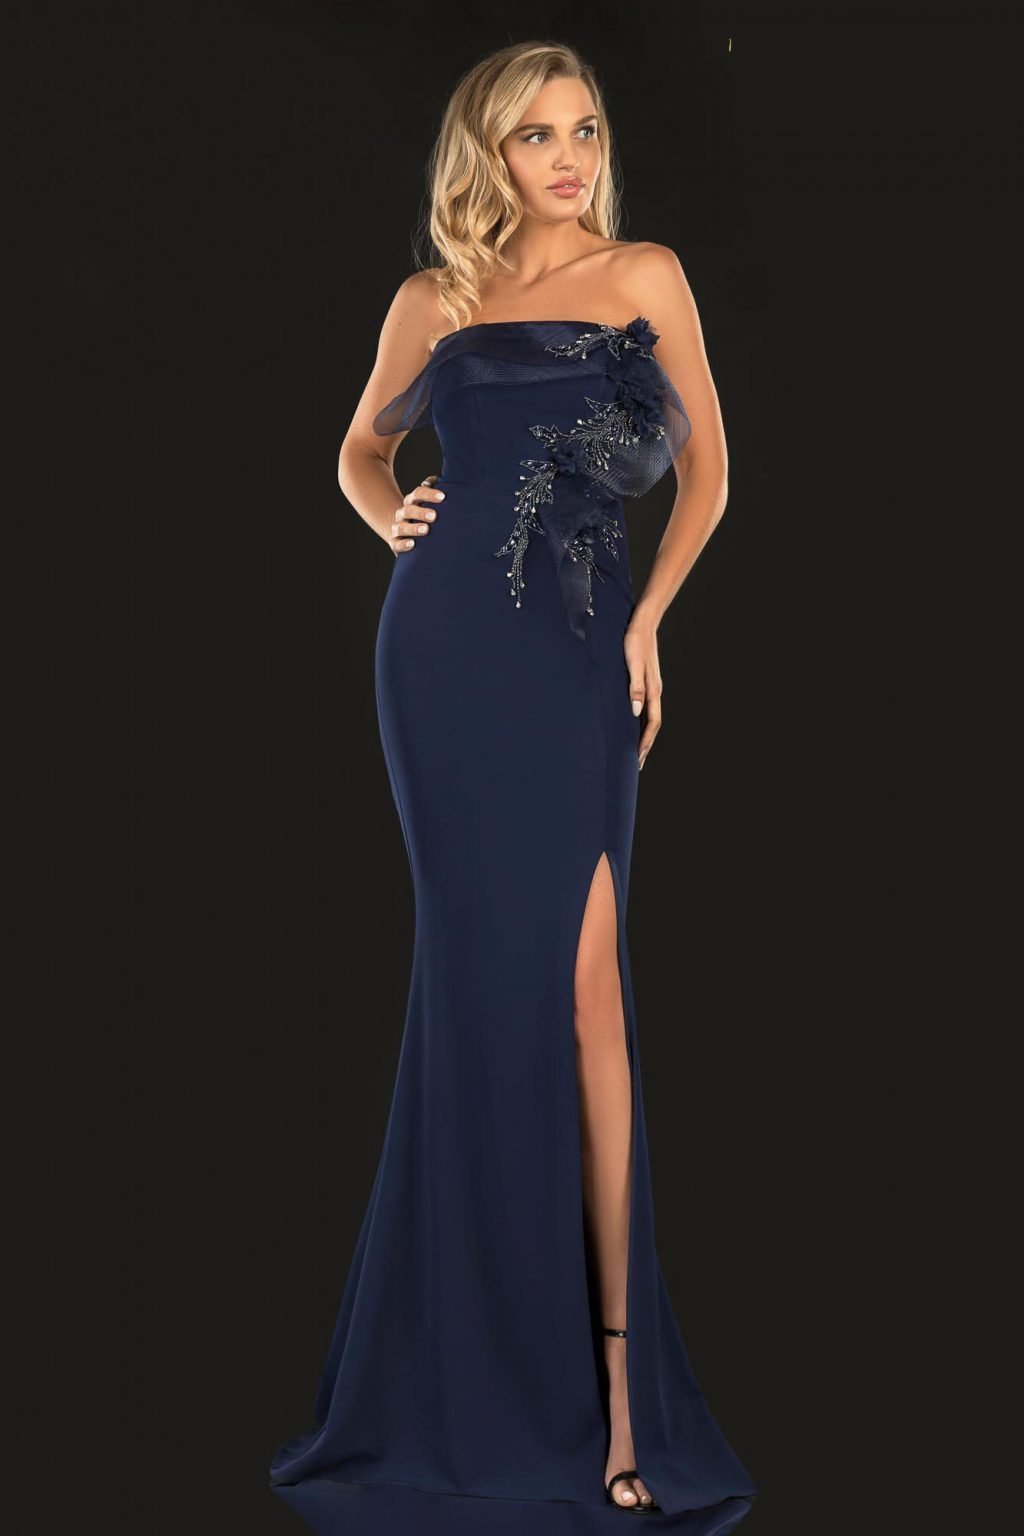 Gorgeous strapless column dress by Terani Couture, style number 2021E2818, adorned with sculpted horsehair and 3D flowers. Available at Madeline's in Toronto, Canada, and Boca Raton, Florida.